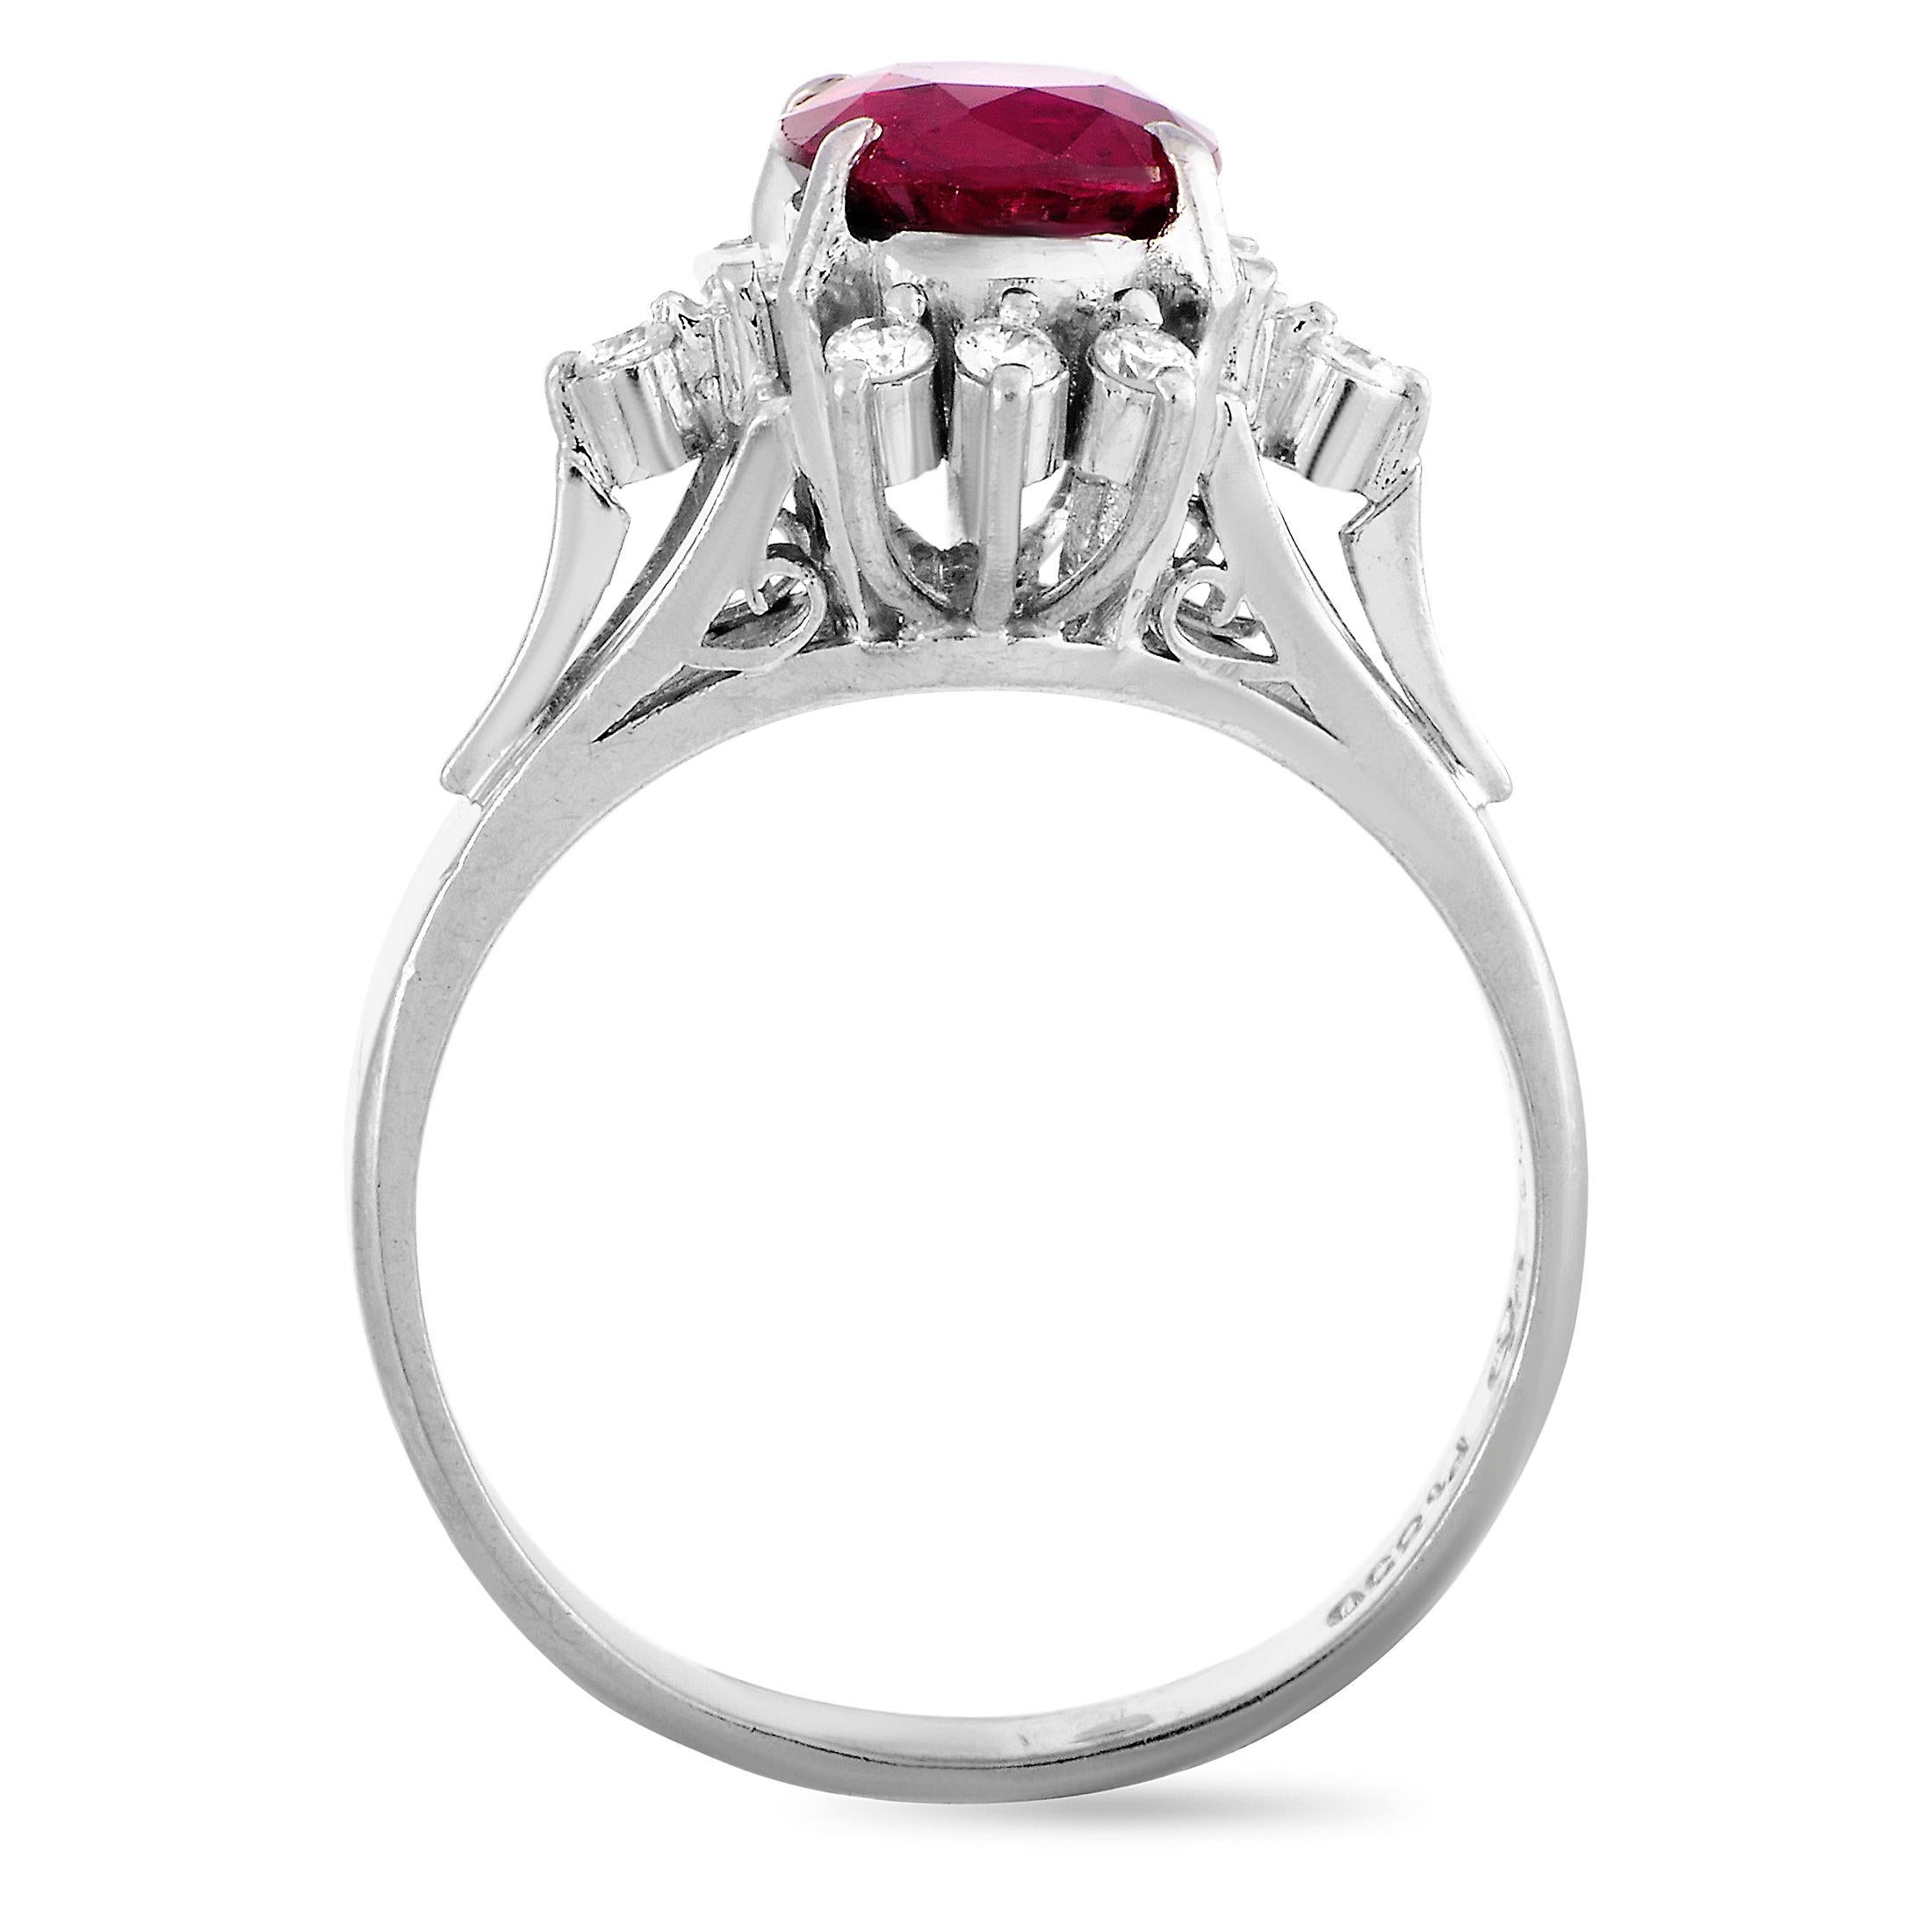 This LB Exclusive ring is made of platinum and set with a ruby that weighs 1.63 carats and with diamonds that total 0.20 carats. The ring weighs 5.6 grams, boasting band thickness of 3 mm and top height of 9 mm, while top dimensions measure 11 by 12